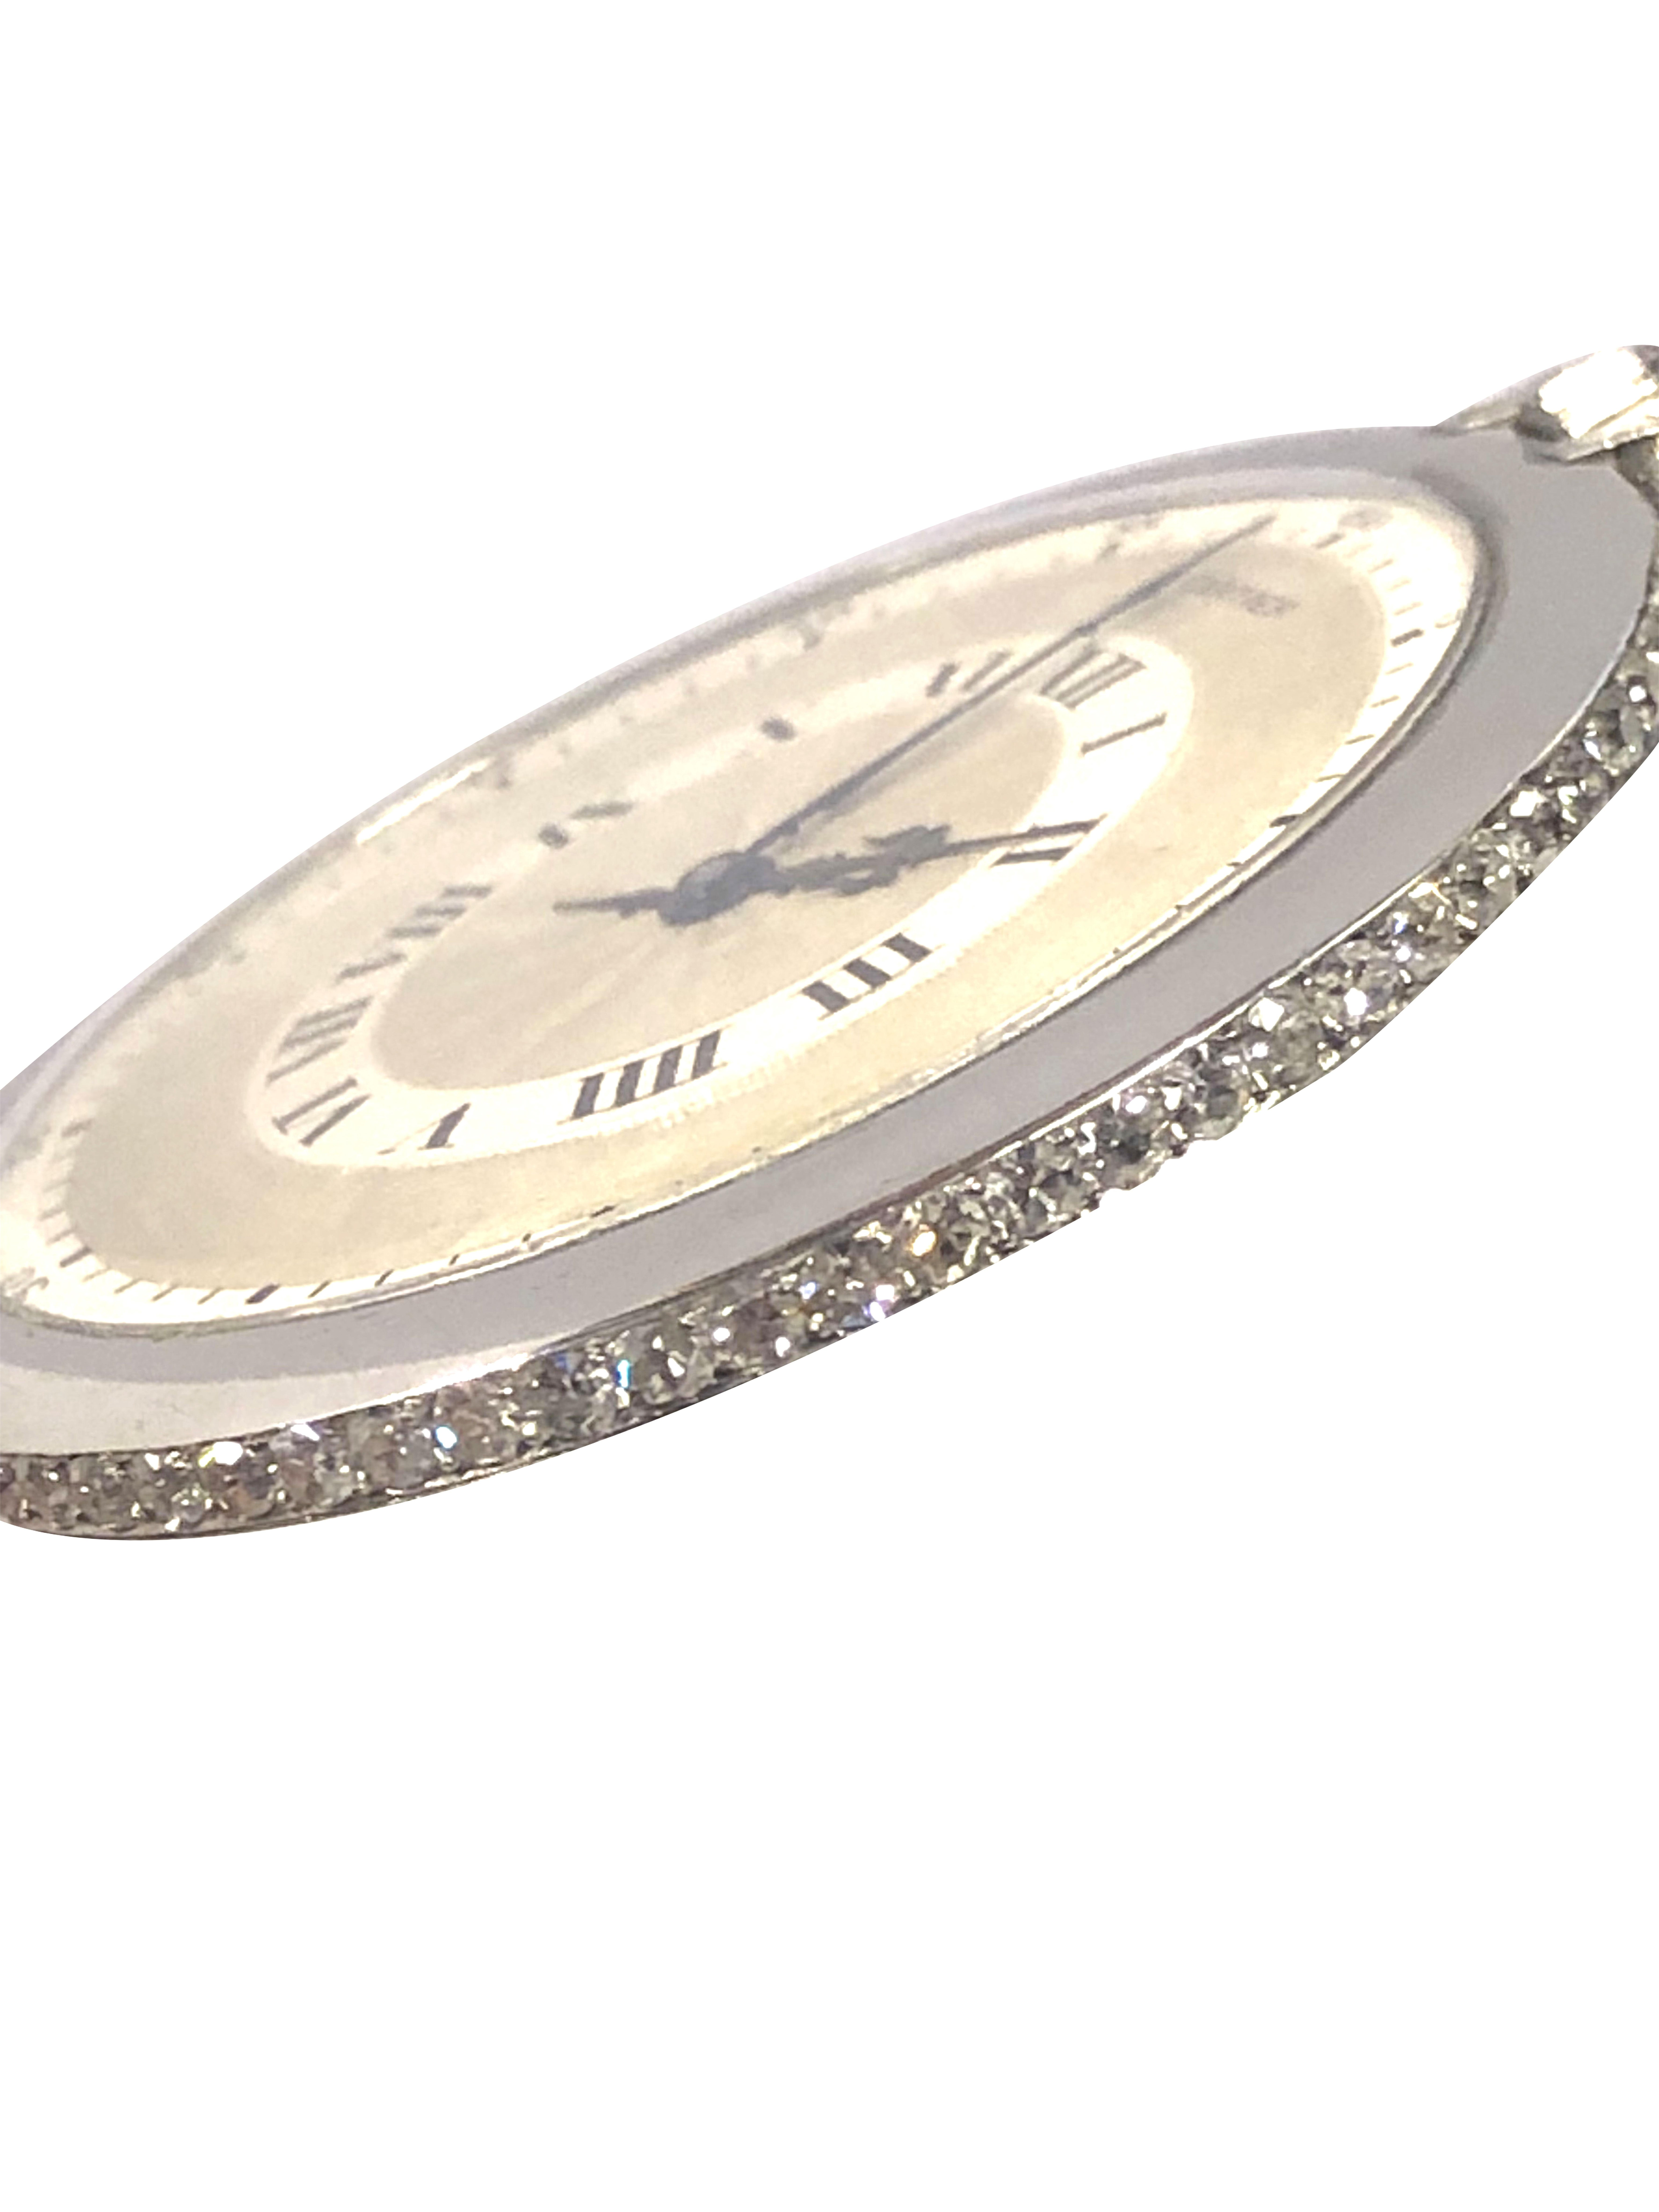 Circa 1920s Cartier Pocket Watch, 45 M.M. Platinum 3 Piece case with Diamond set case perimeter, approximately 2 Carats. Jeweled Nickel lever mechanical wind movement by EWC, European Watch & Clock. original Silver Satin Engine turned dial with